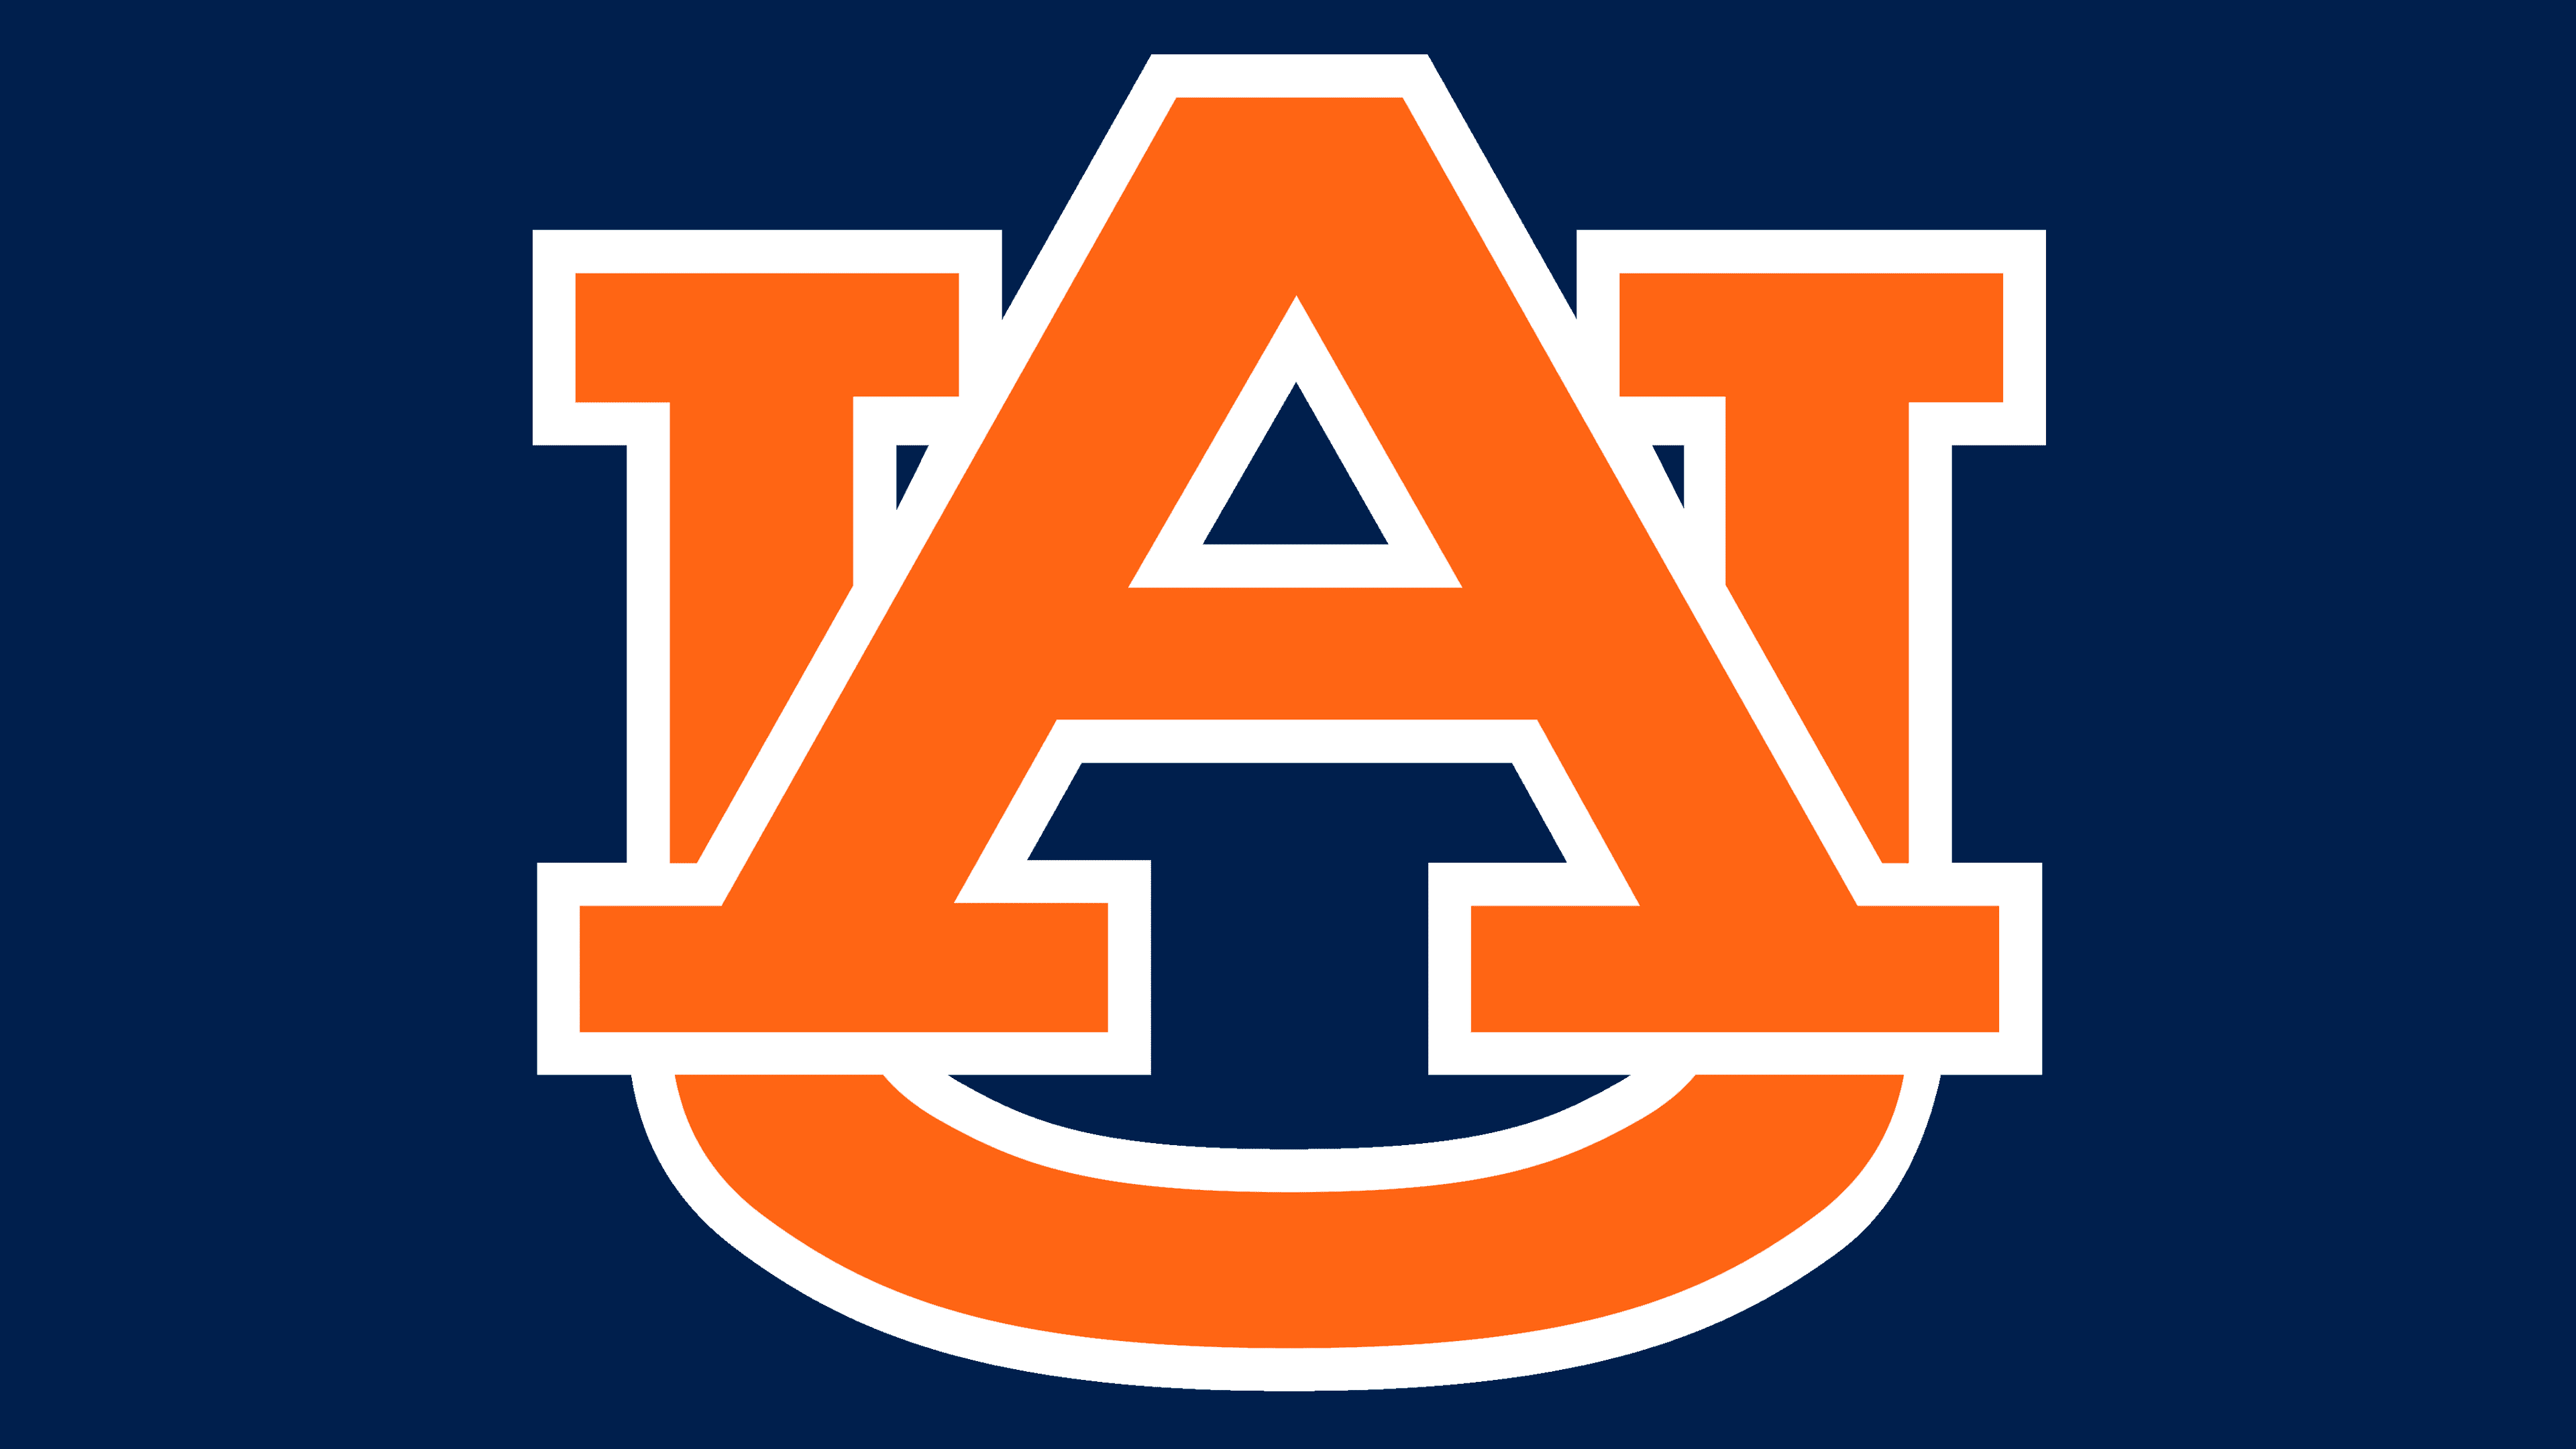 AU Logo, PNG, Symbol, History, Meaning